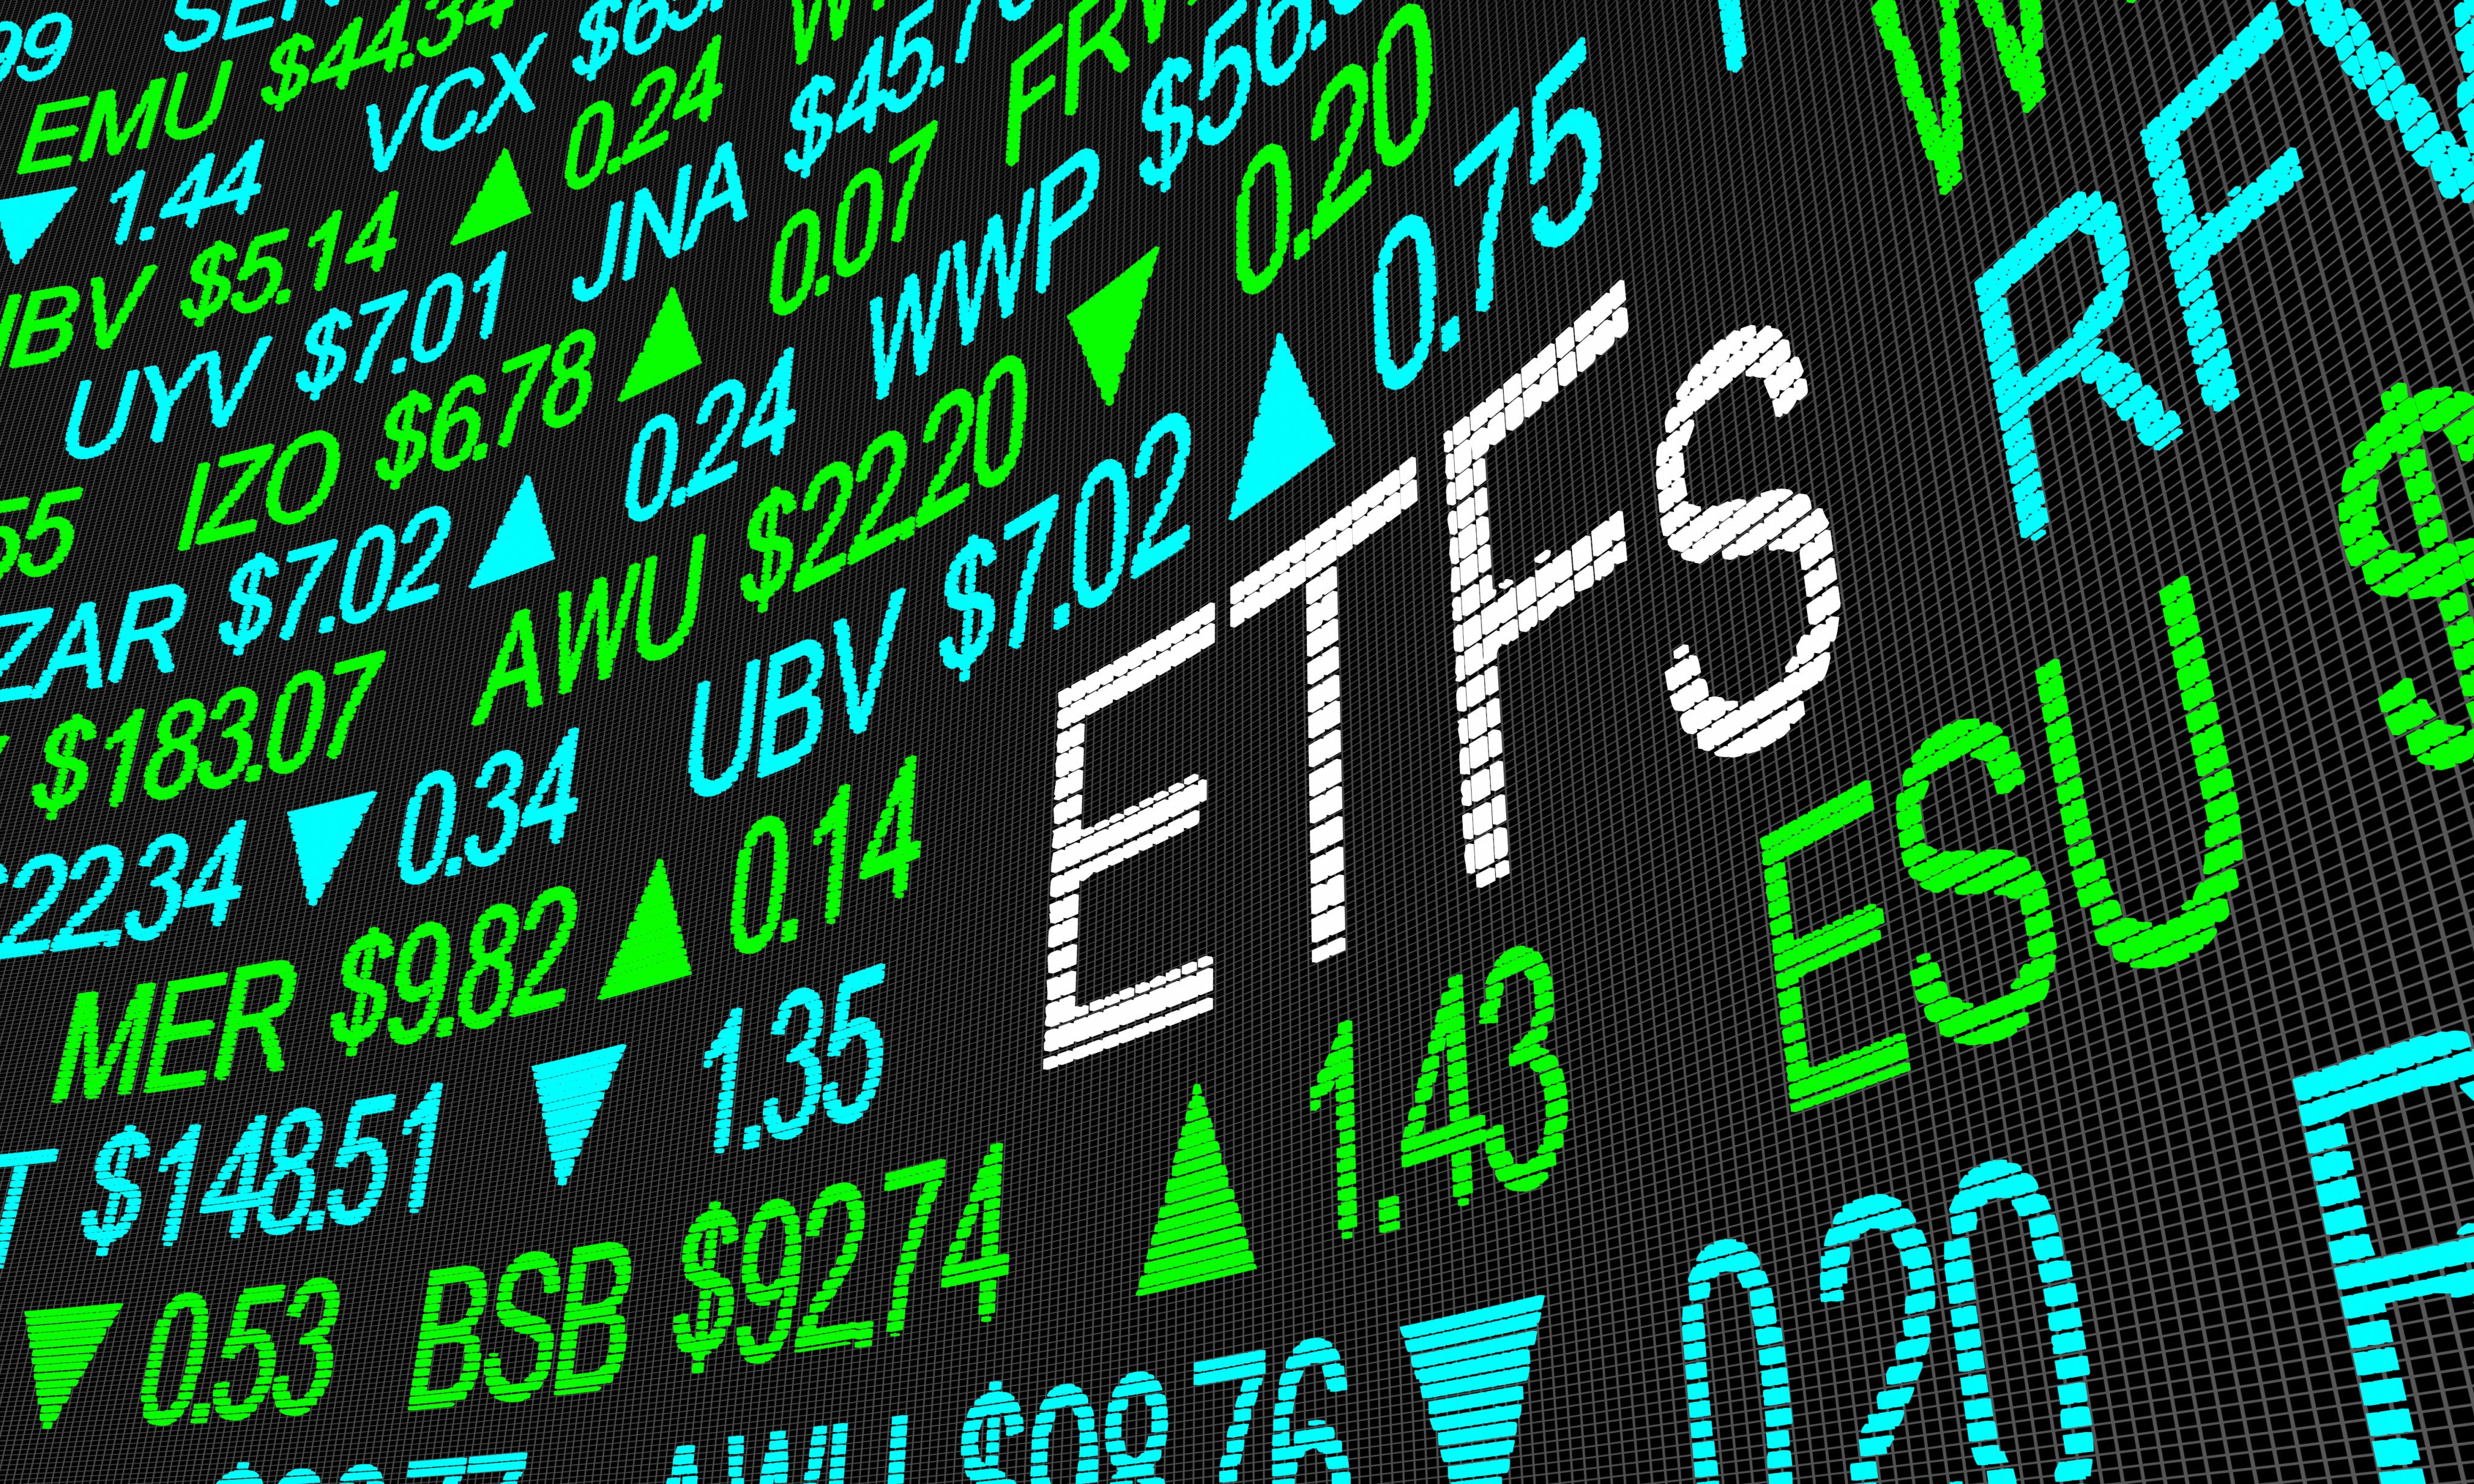 Chinese investors have been buying into US stocks through China-listed EFTs as they seek to diversify their portfolios. Photo: Shutterstock